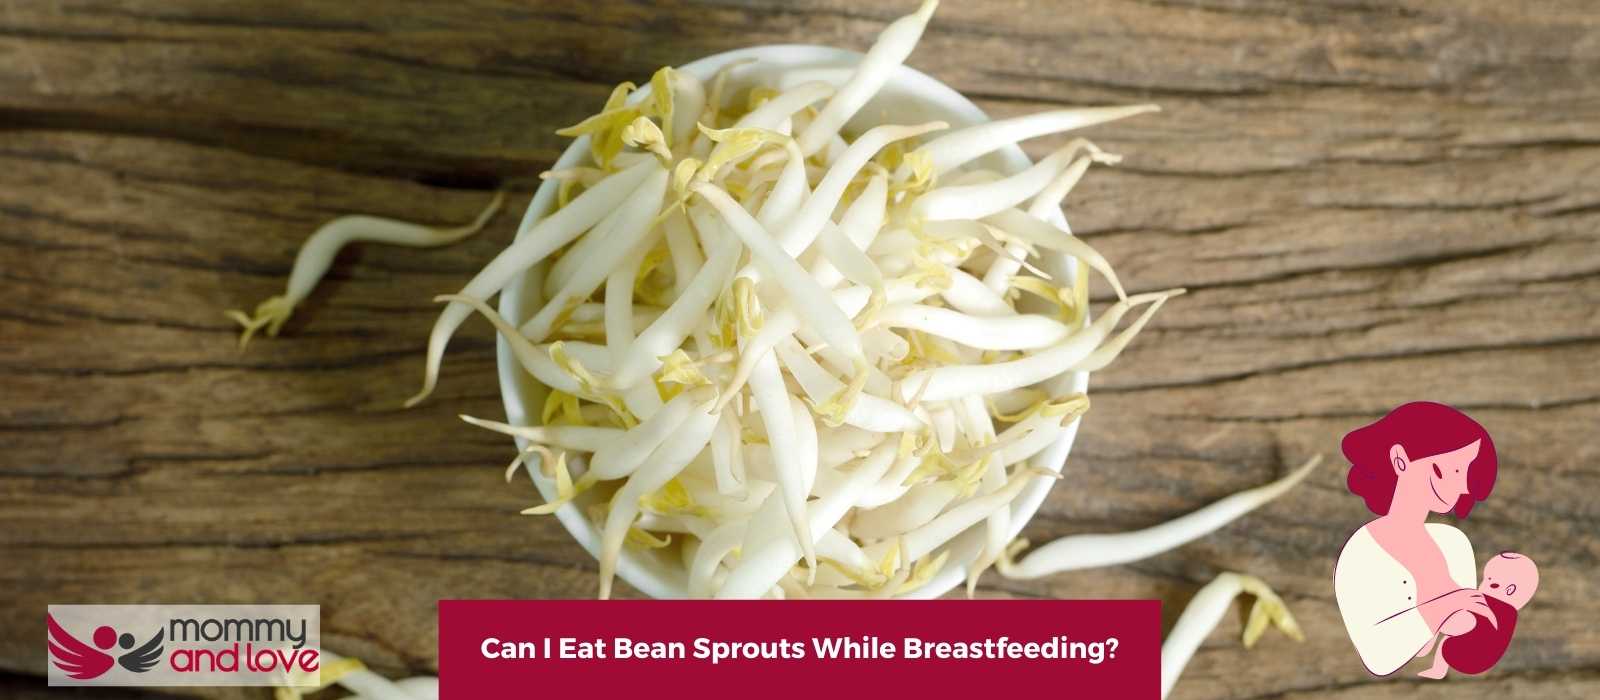 Can I Eat Bean Sprouts While Breastfeeding